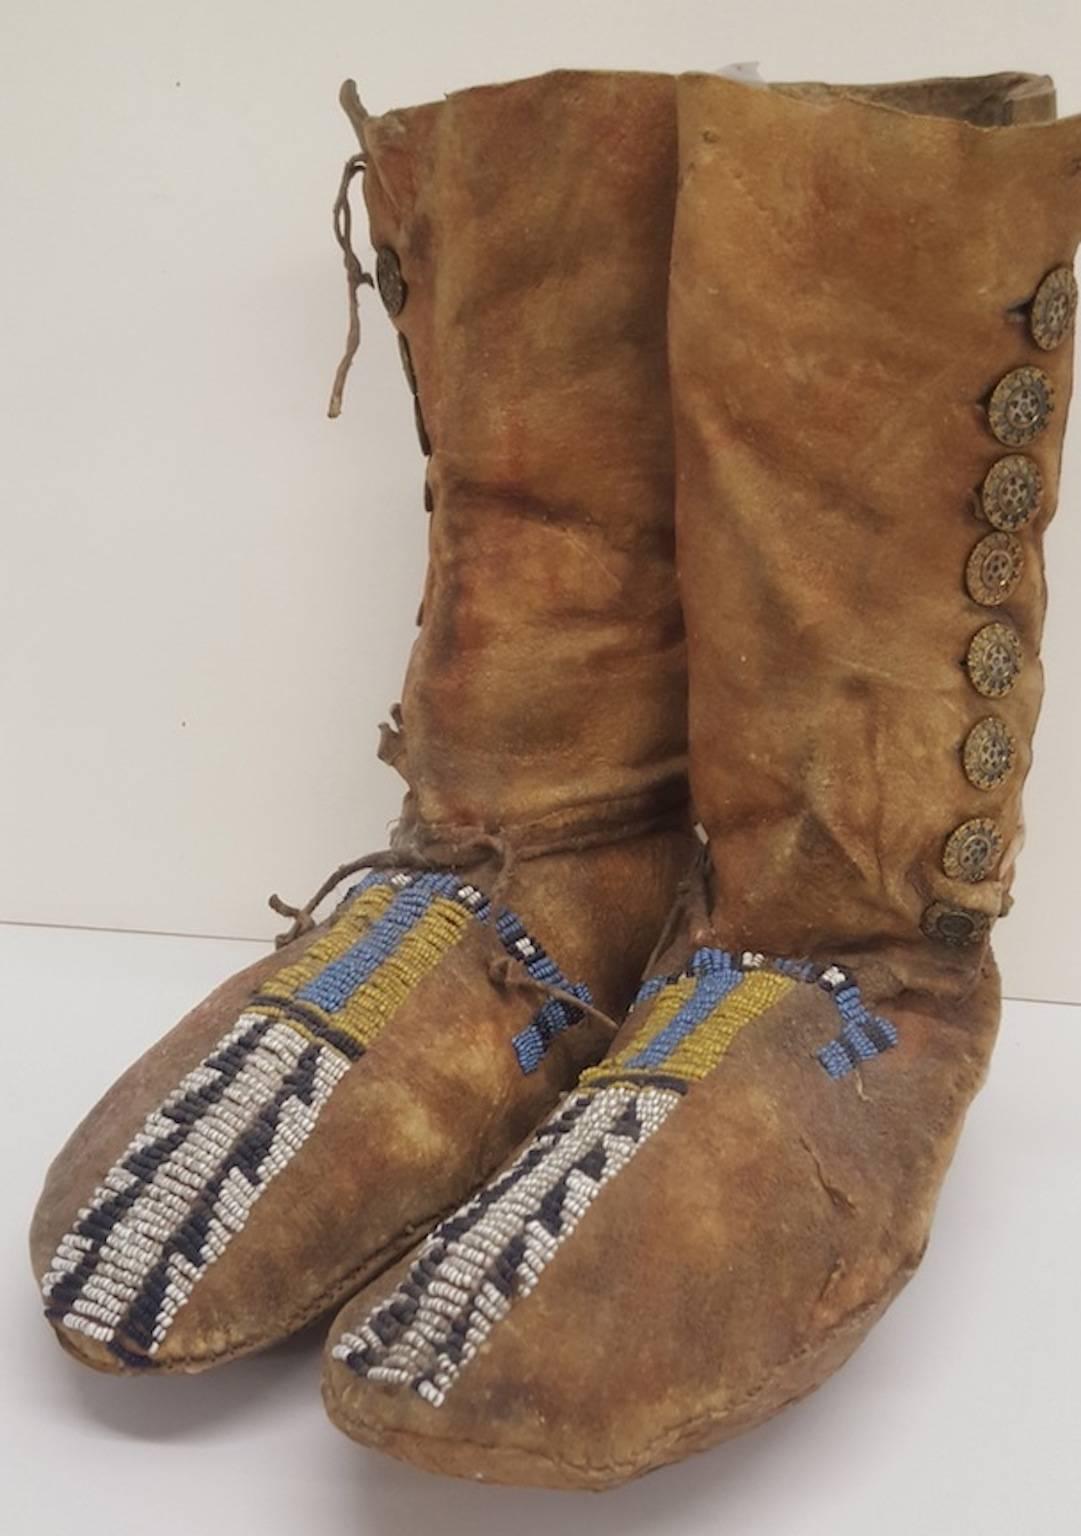 A pair of high button, deerskin moccasins of a Plains Native American tribe.
Beaded by hand on each moccasin top, in yellow and blue above a black and white saw tooth band or strip of period beads, down to the toe.
There is a row of machine made